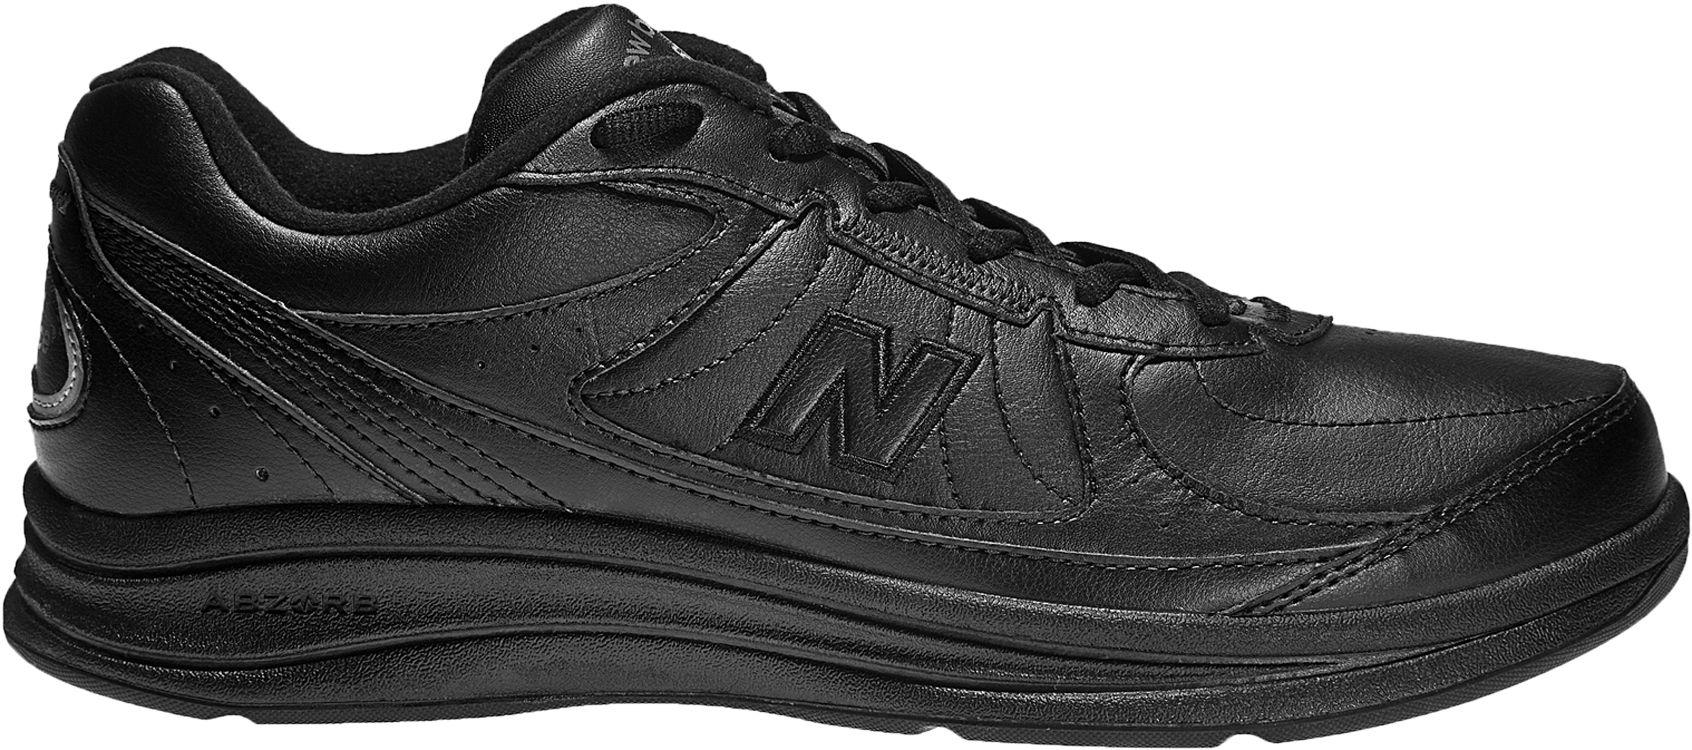 Lyst - New Balance 577 Walking Shoes in Black for Men